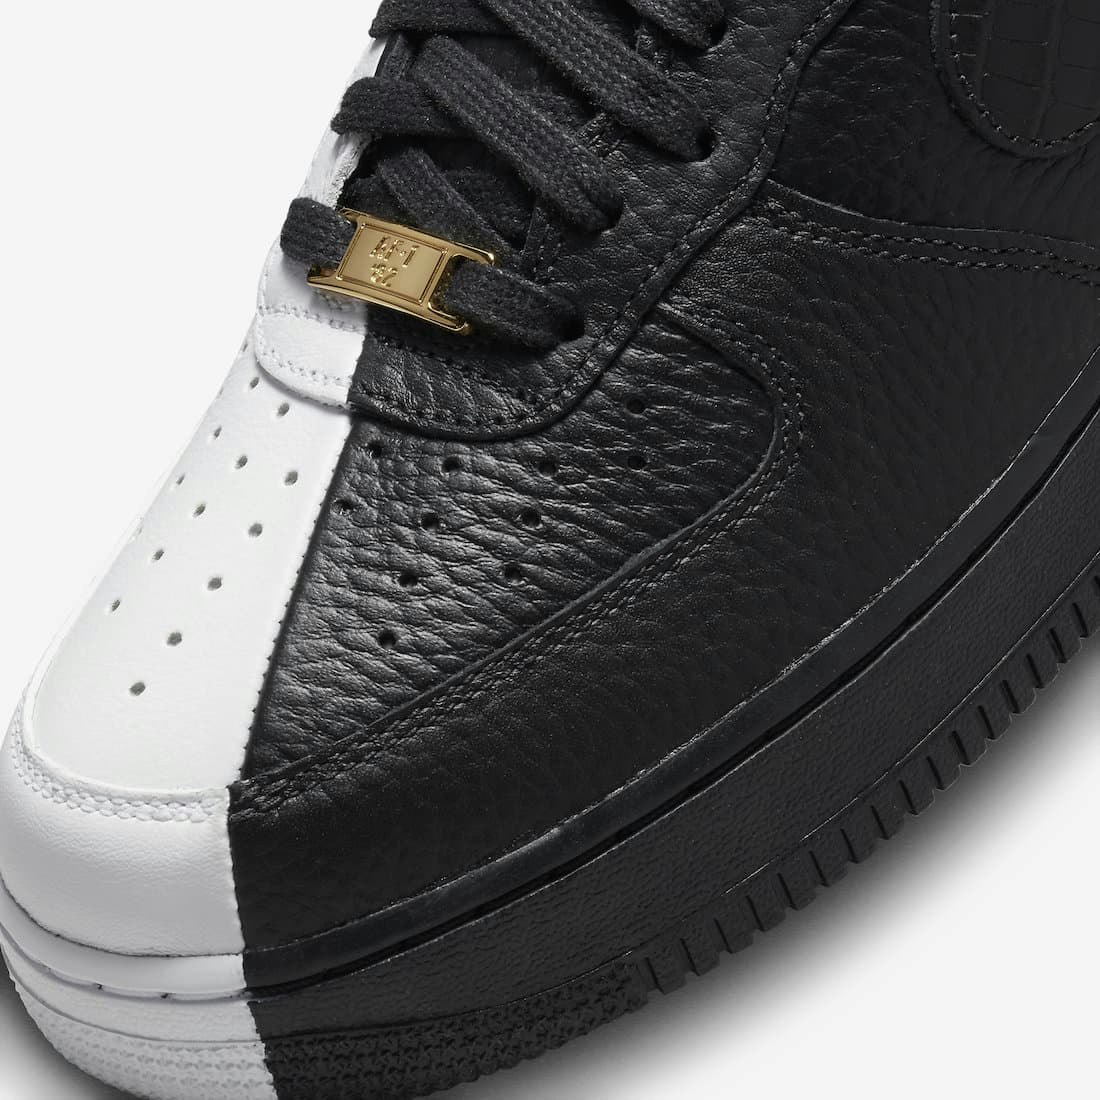 Nike Air Force 1 Low “Anniversary Edition”